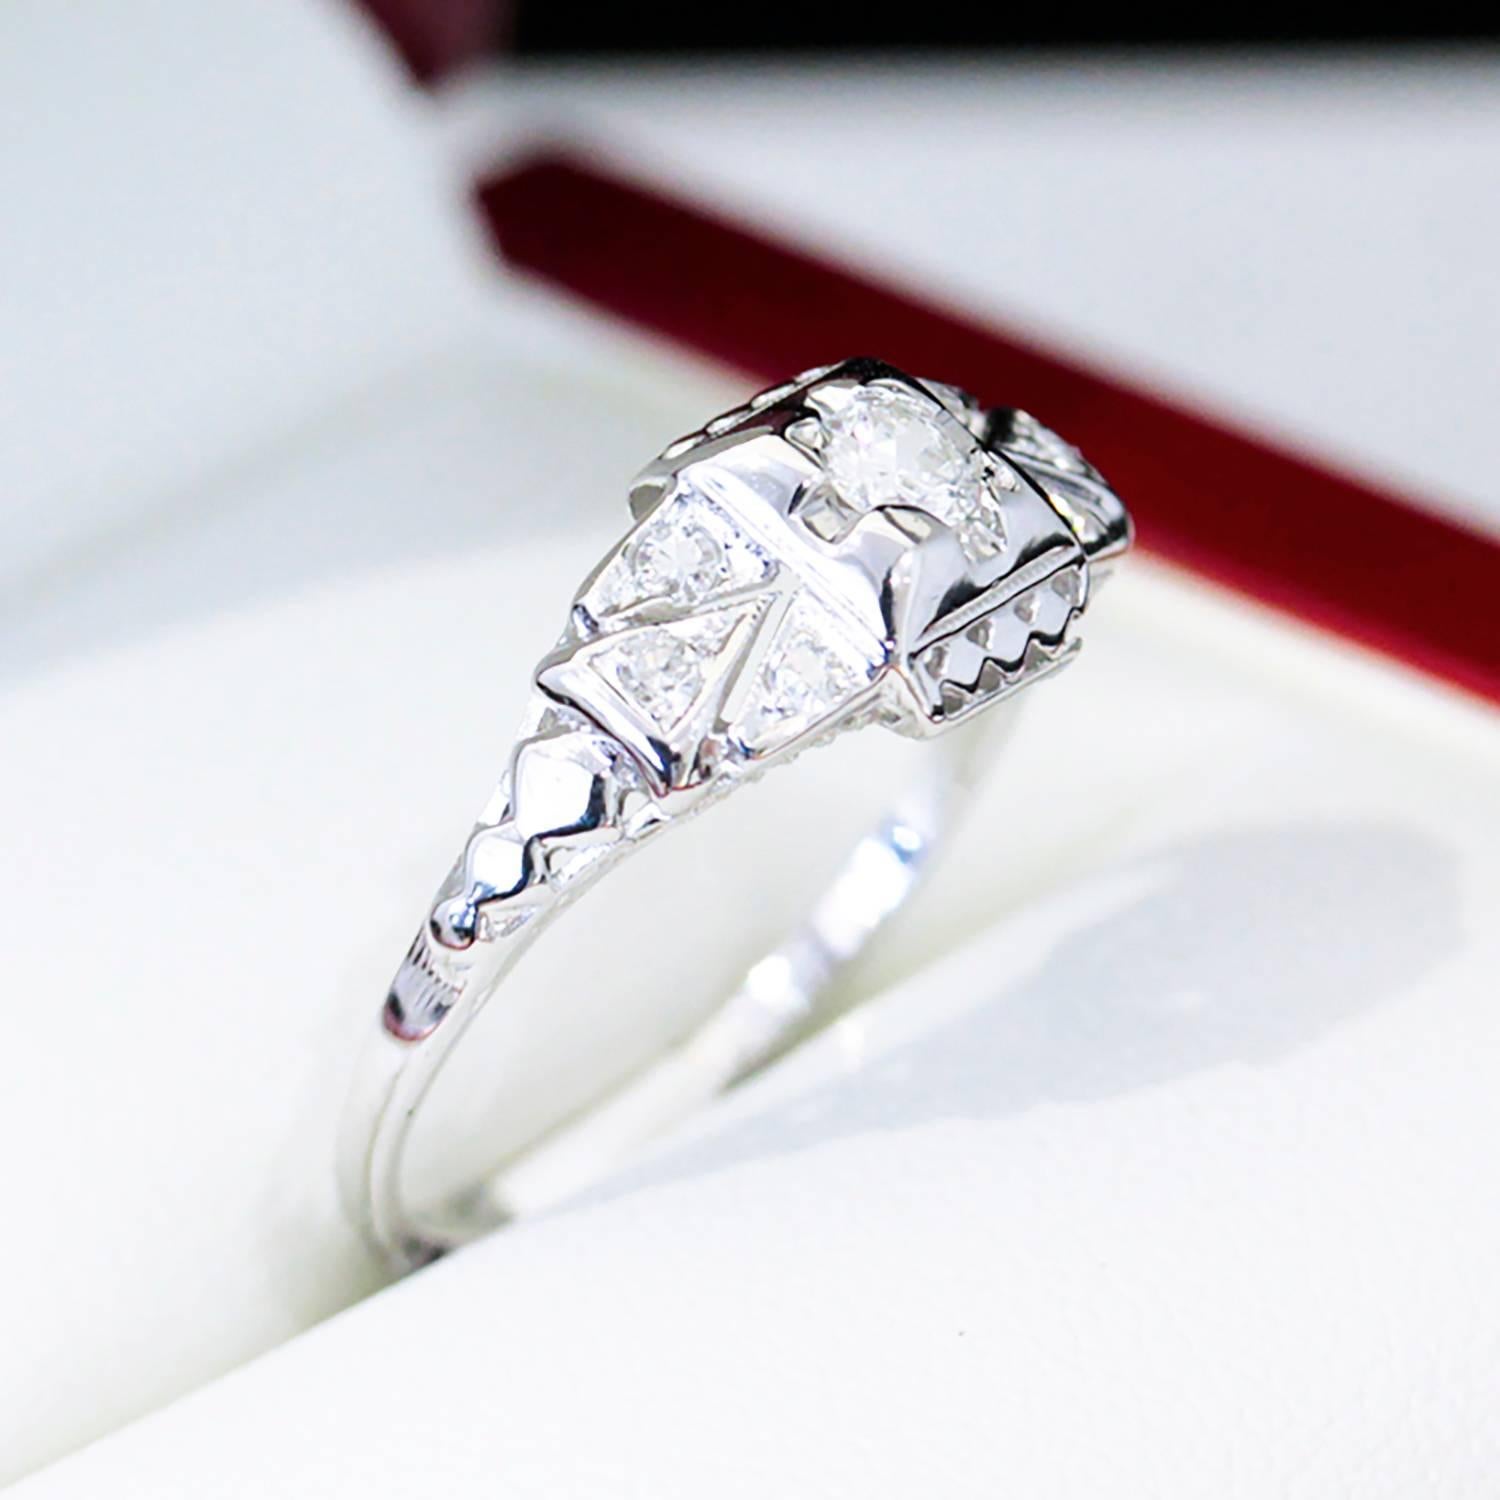 Art Deco Diamond and White Gold Filigree Engagement Ring In Excellent Condition For Sale In Sydney CBD, AU